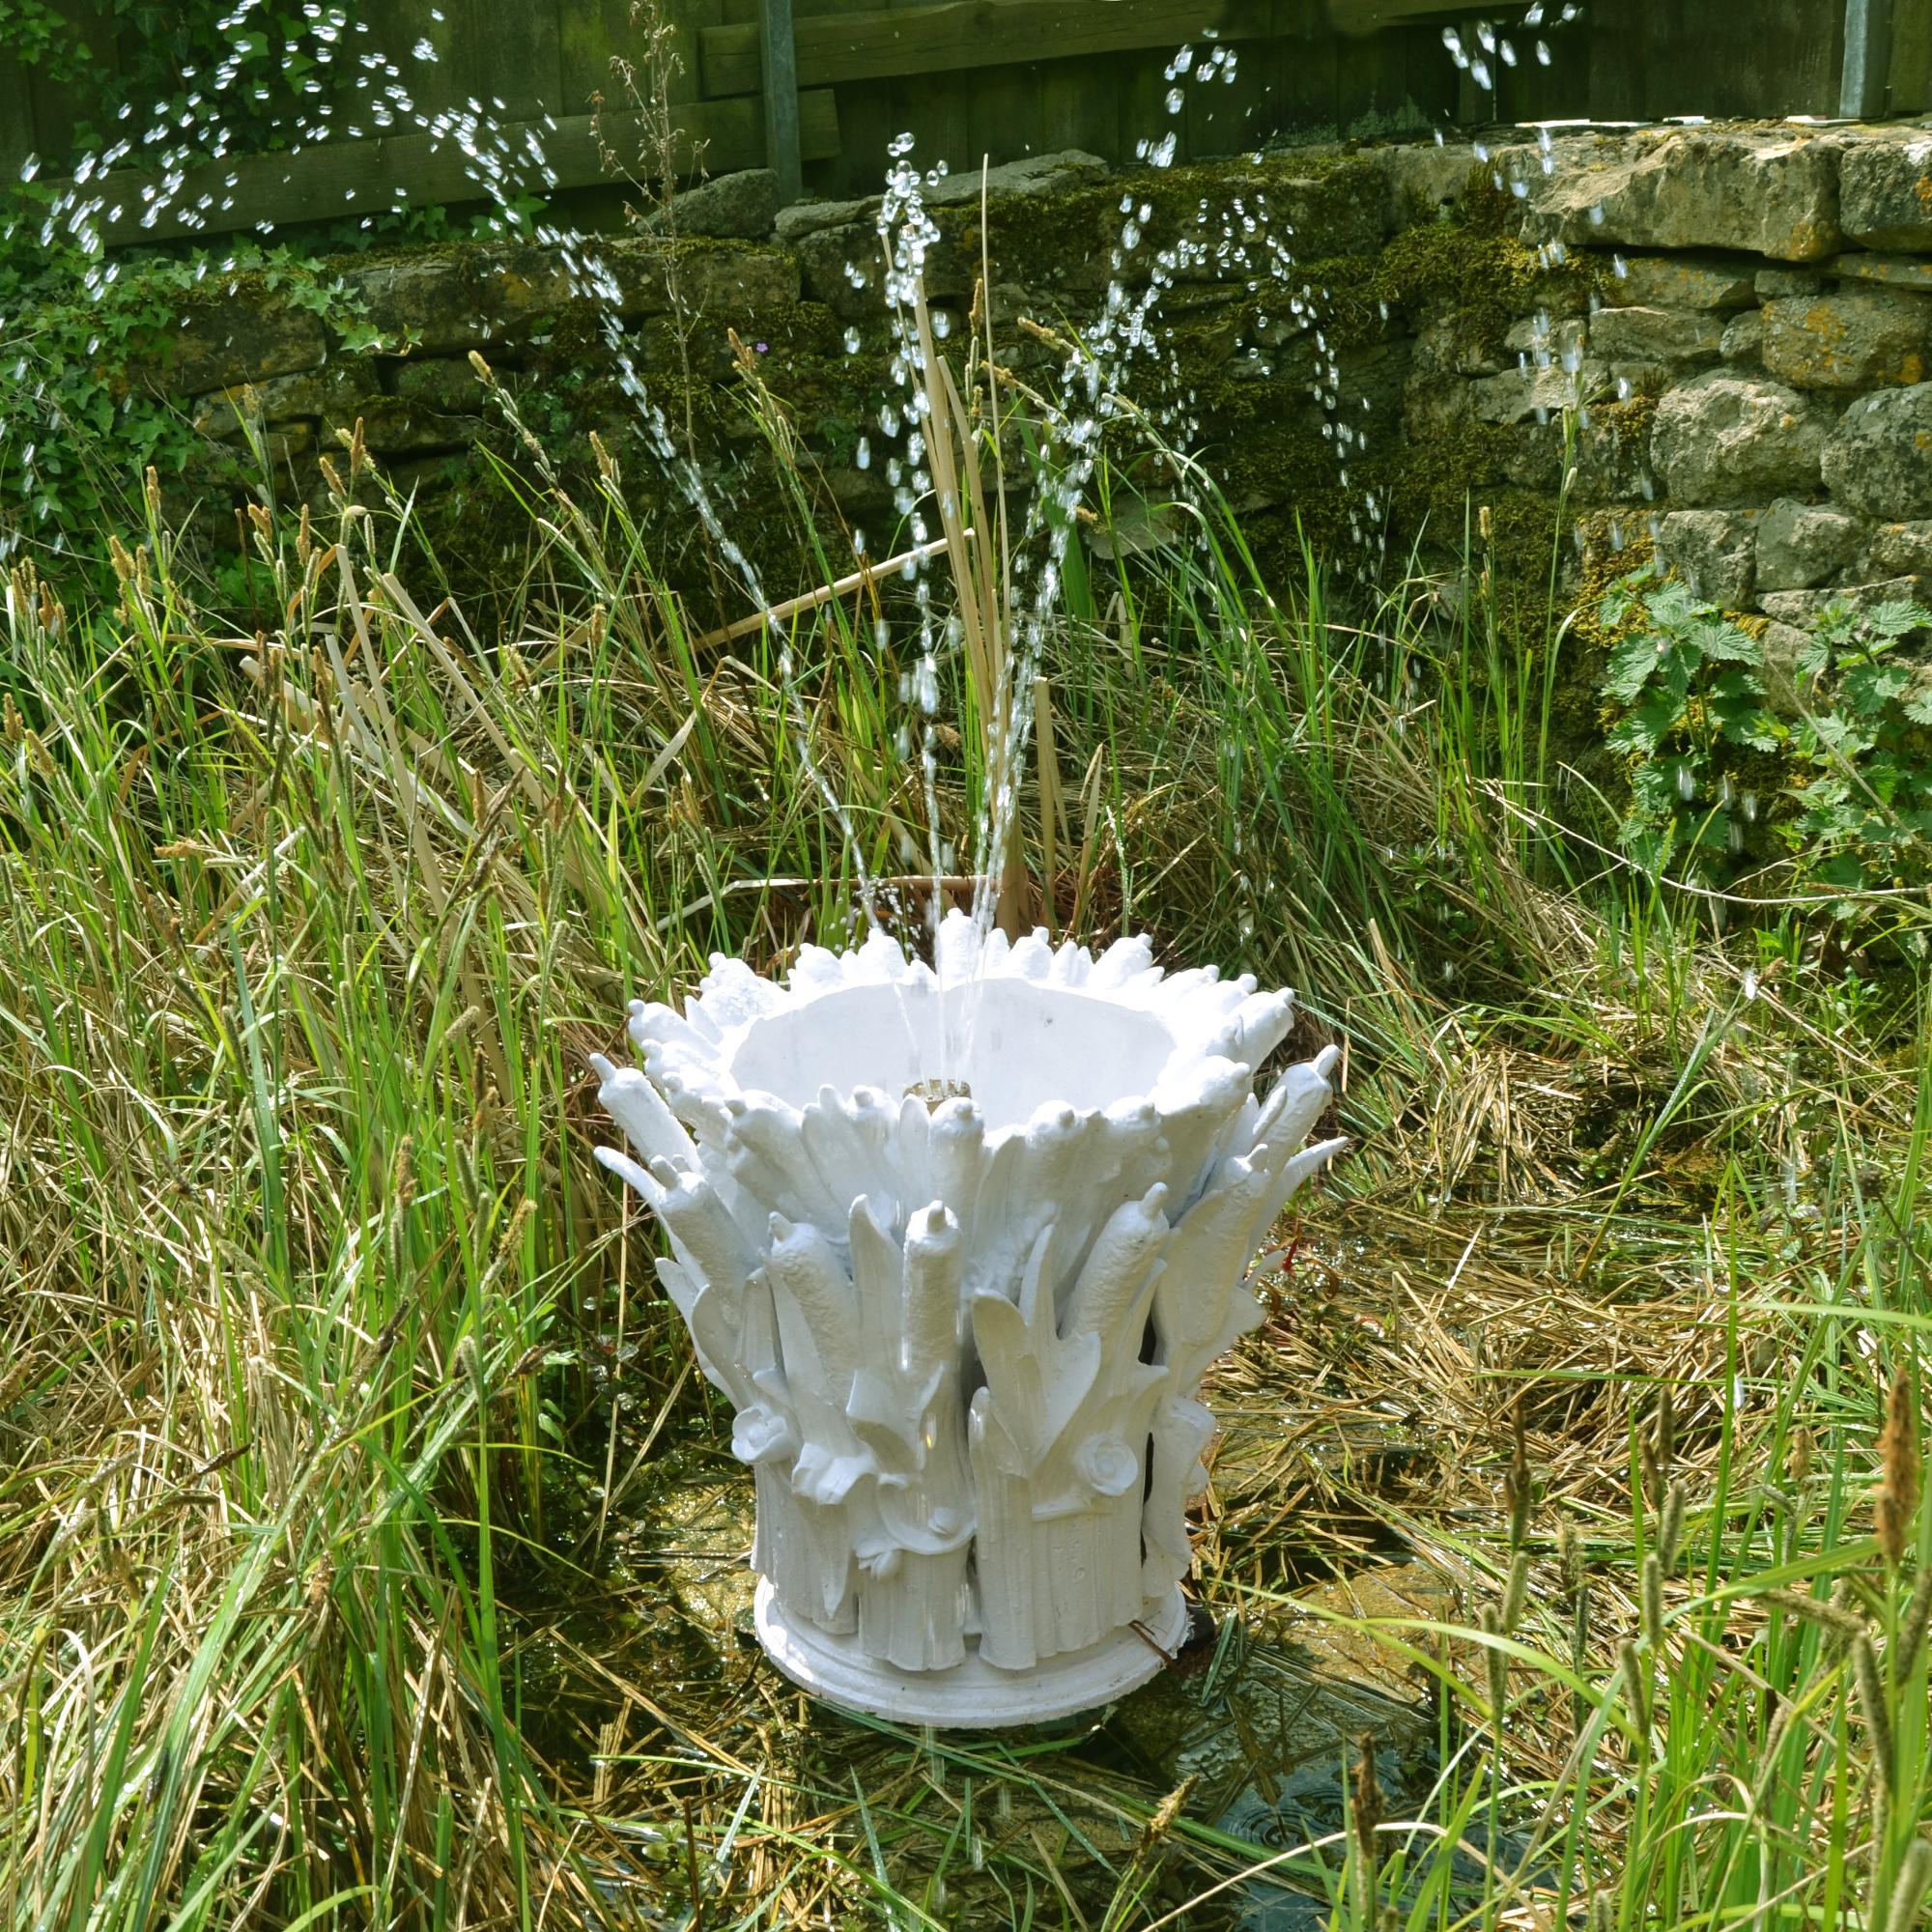 A French 19th century cast iron fountain head in the form of a collection of bulrushes. Cast by the Val d’Osne Foundry near Paris, it is made up of a number of sections then bolted together to form a fountain spout housing. 

We have shot-blasted,